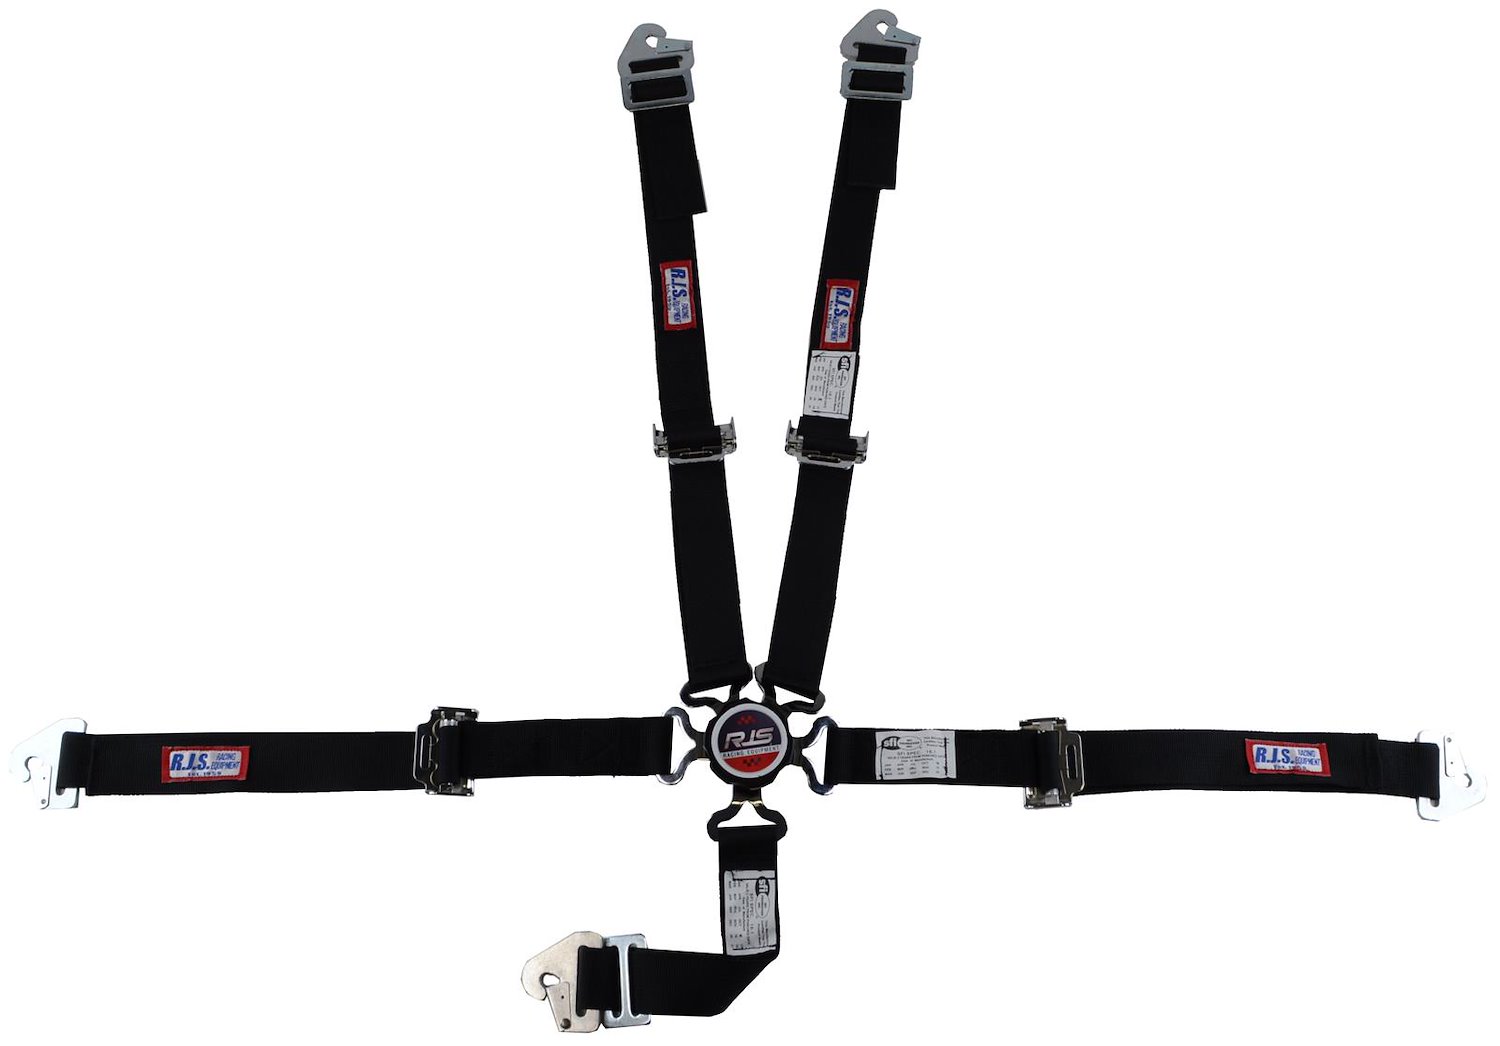 SFI 16.1 CAM-LOCK HARNESS 2 PULL DOWN Lap Belt 2 Shoulder Harness Individual FLOOR Mount 2 DOUBLESub ALL WRAP ENDS YELLOW